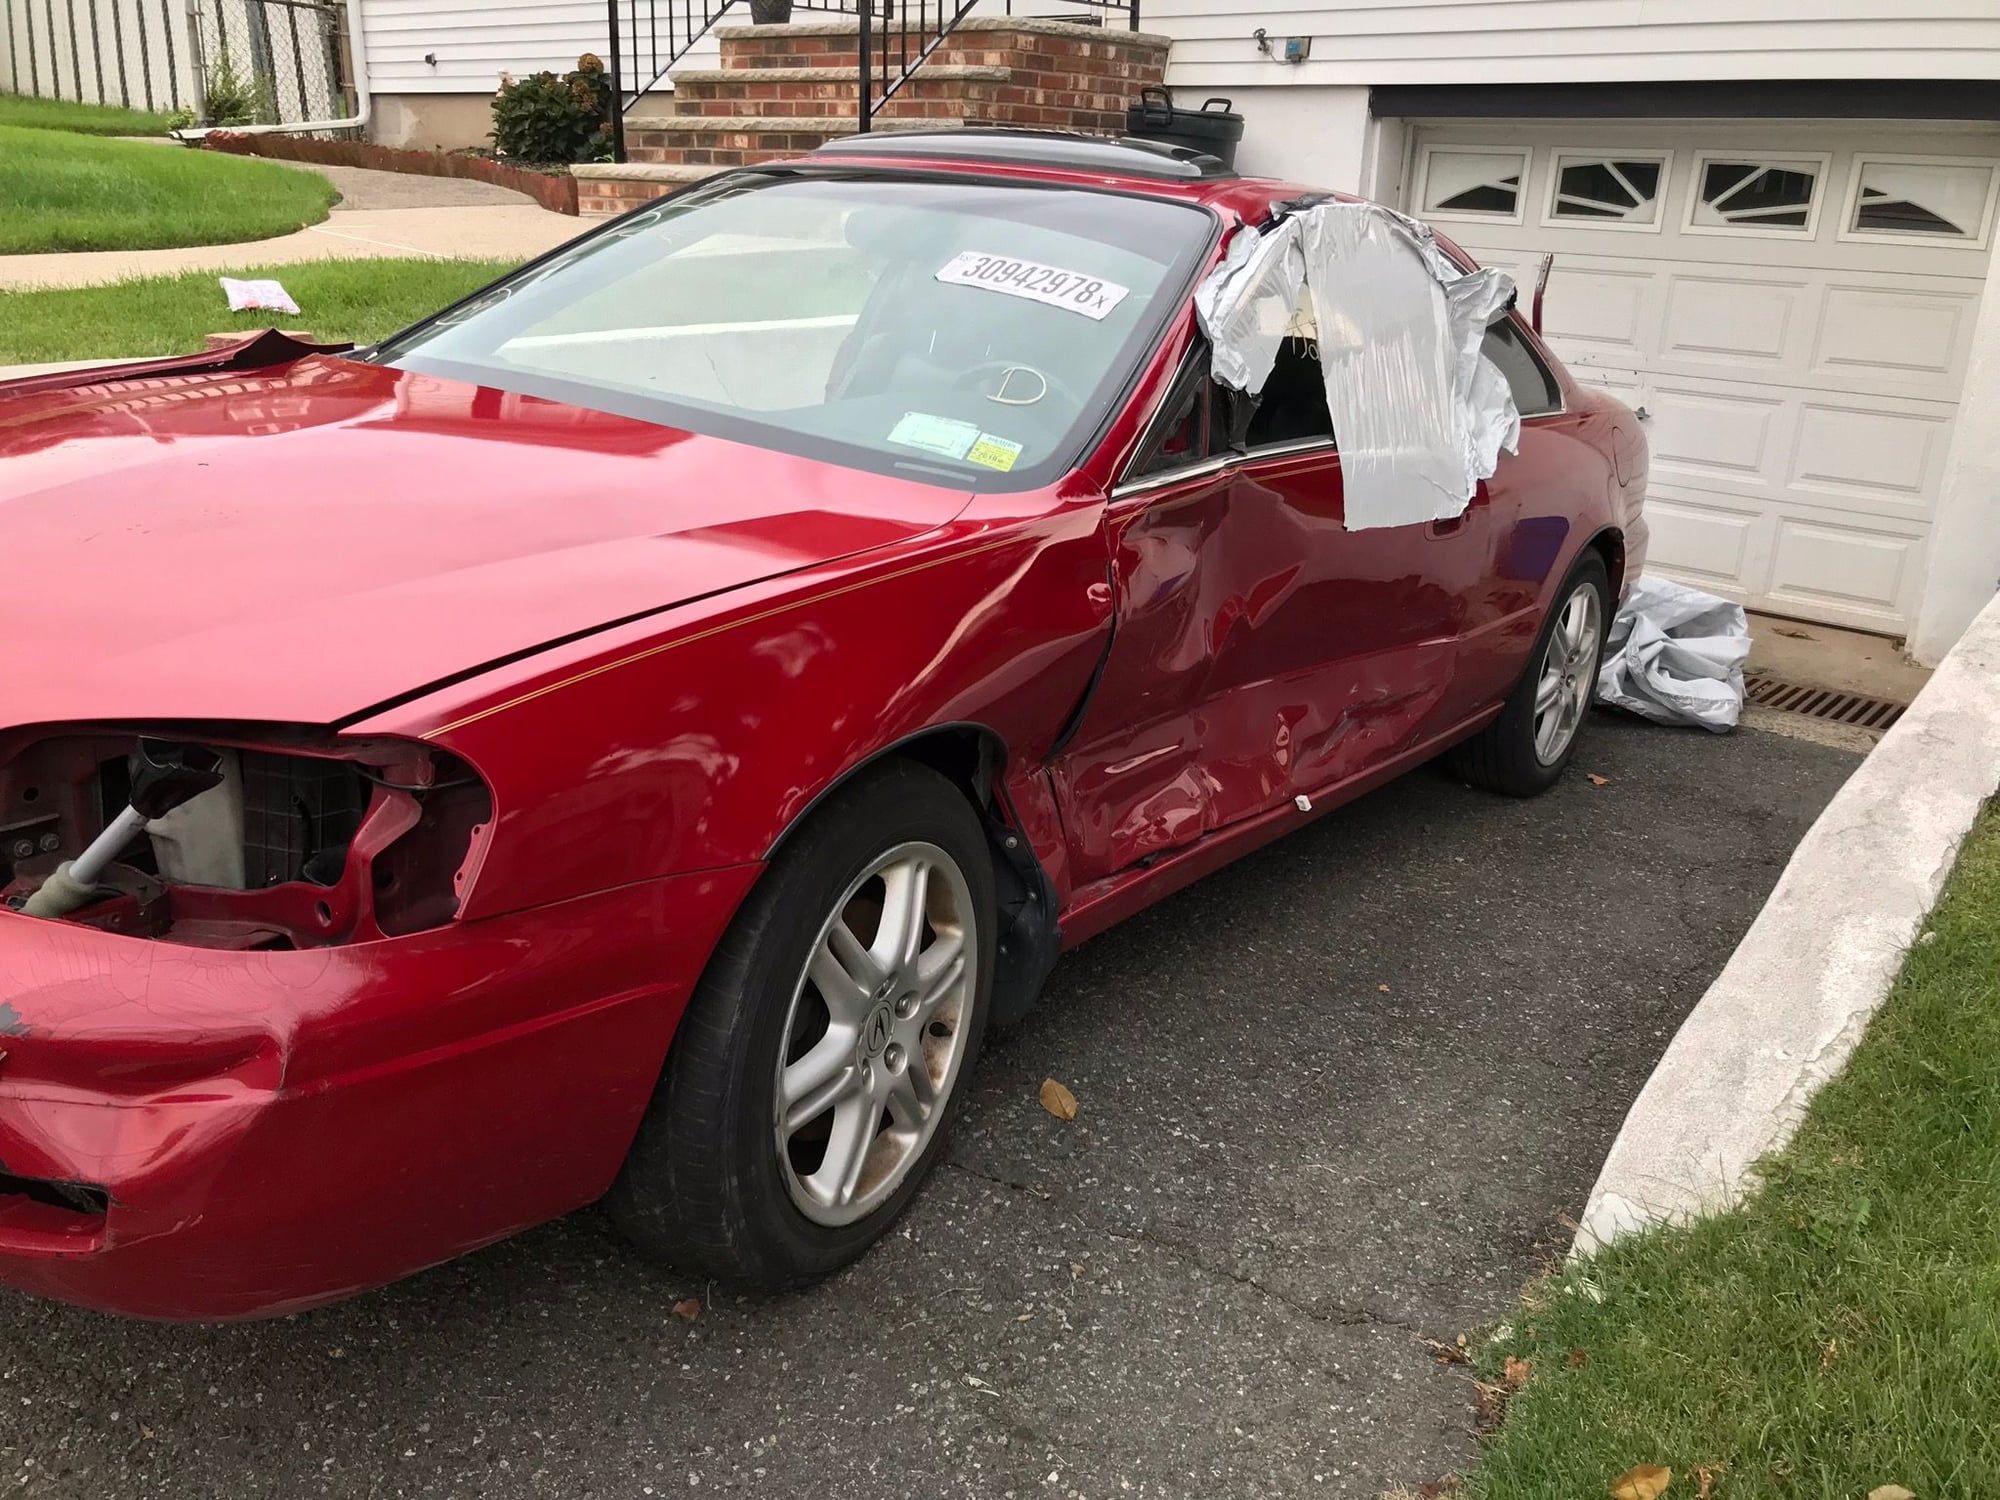 2003 Acura CL - FS: 2003 Acura CL Type S Parts Car...... - Used - VIN 19uya41753a012345 - 6 cyl - 2WD - Automatic - Coupe - Red - Belleville, NJ 07109, United States